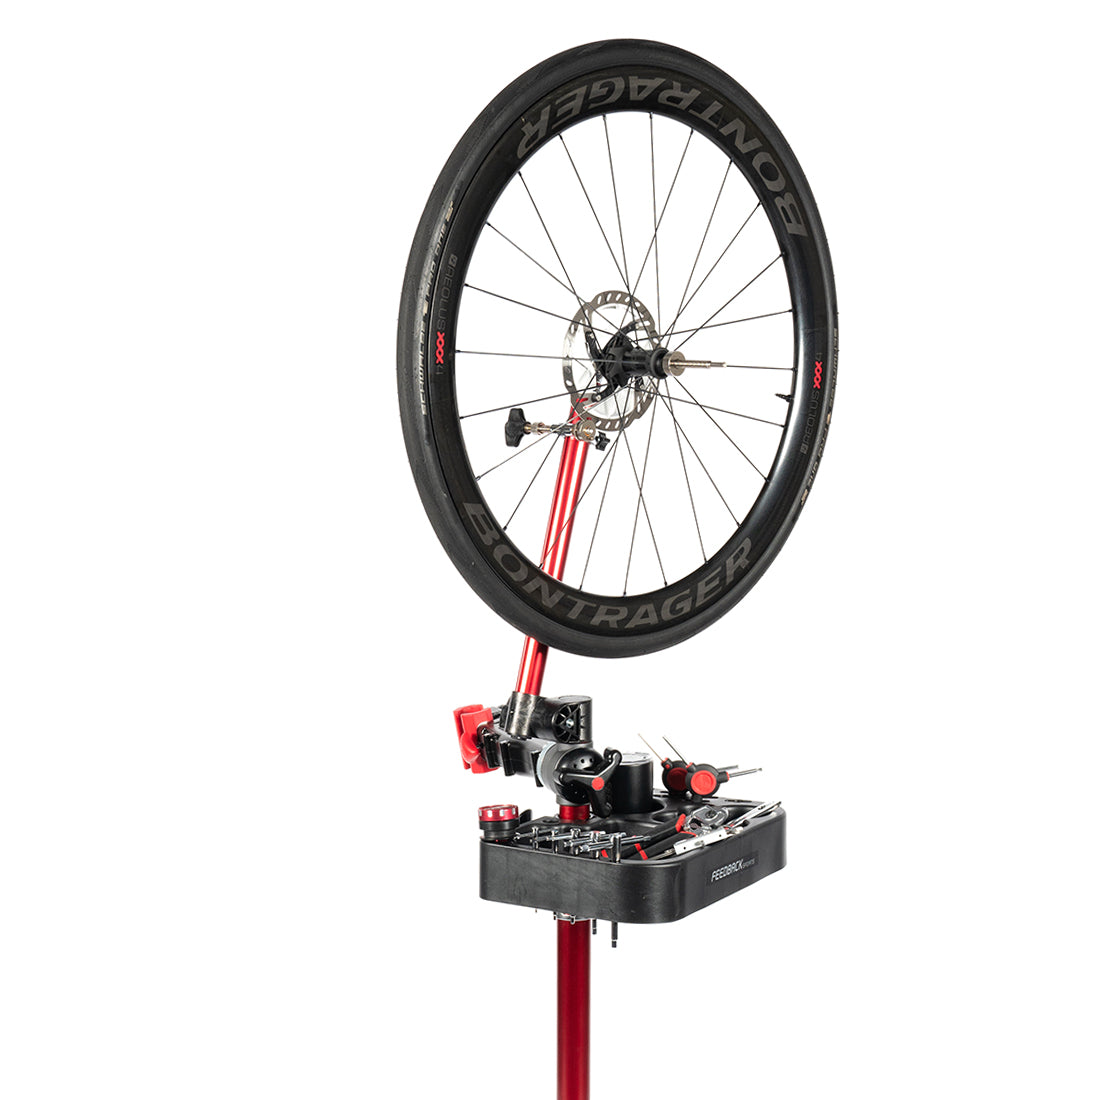 Bike wheel truing stand mounted on a bike repair stand with tool tray and wheel installed.